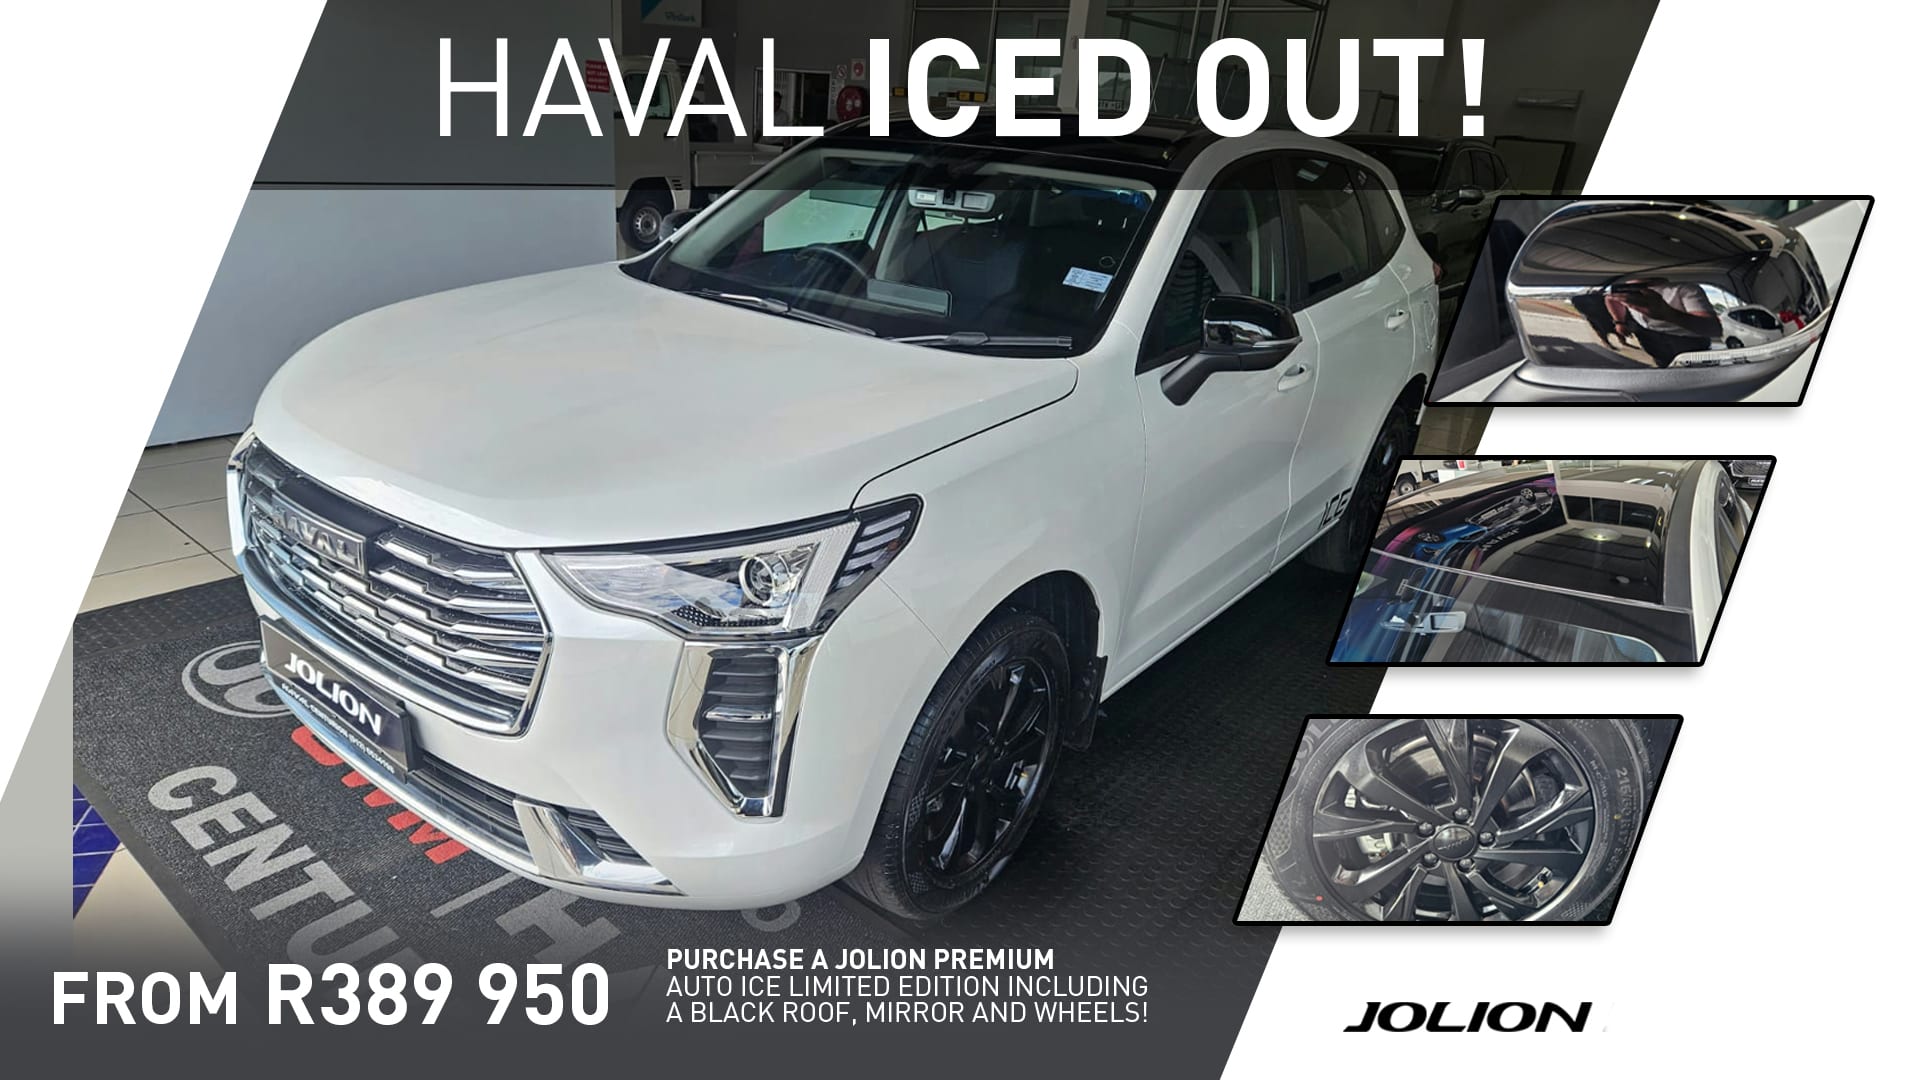 HAVAL ICED OUT!